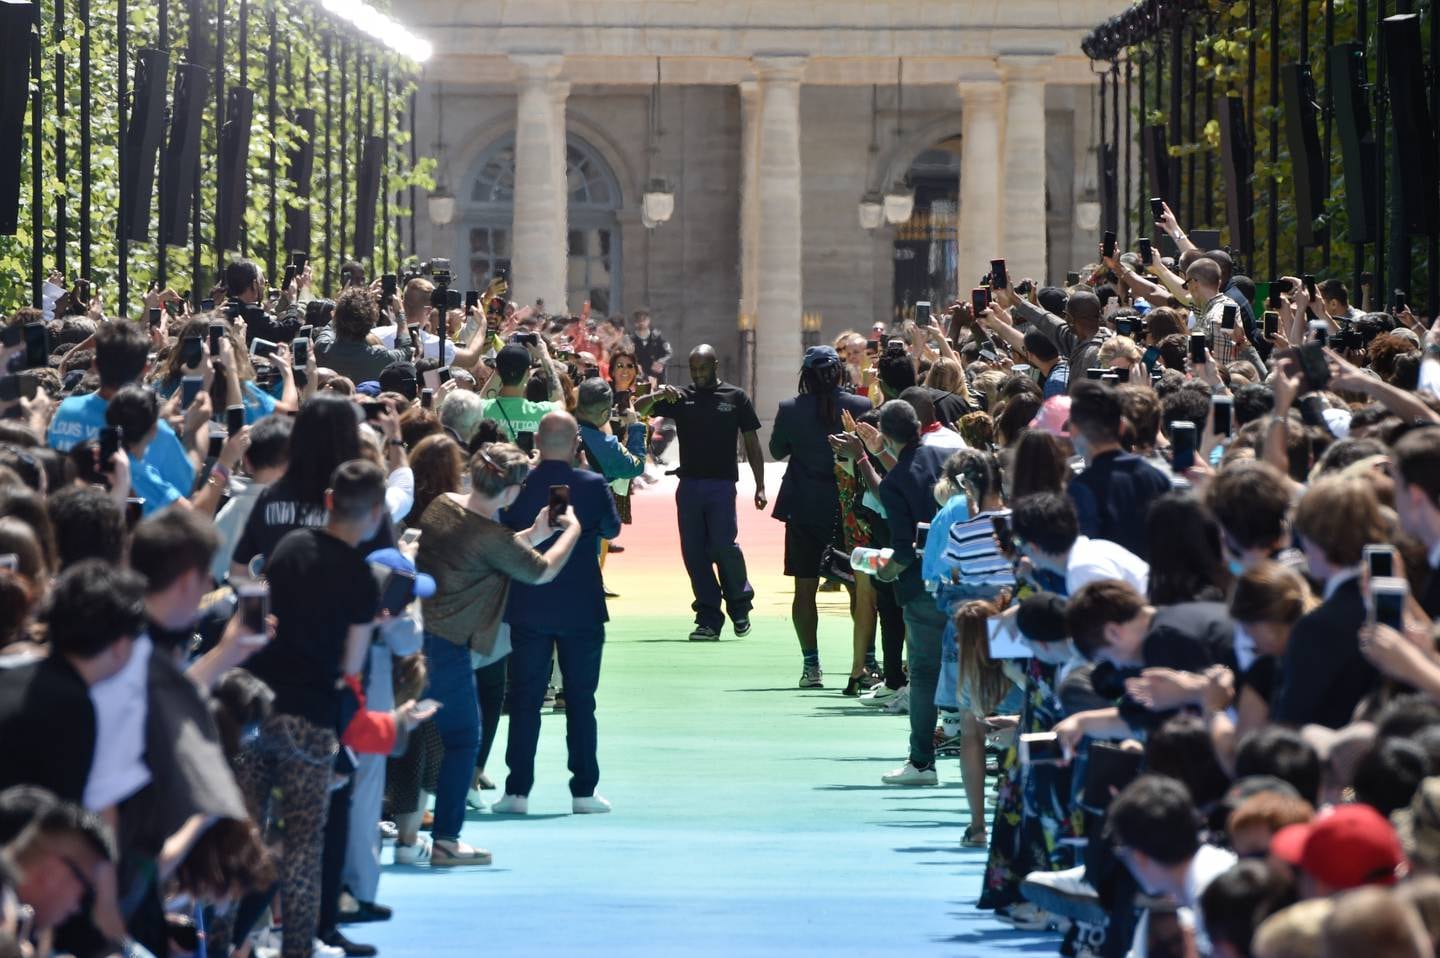 Virgil Abloh takes a bow at his first show for Louis Vuitton in June 2018. Peter White/Getty Images